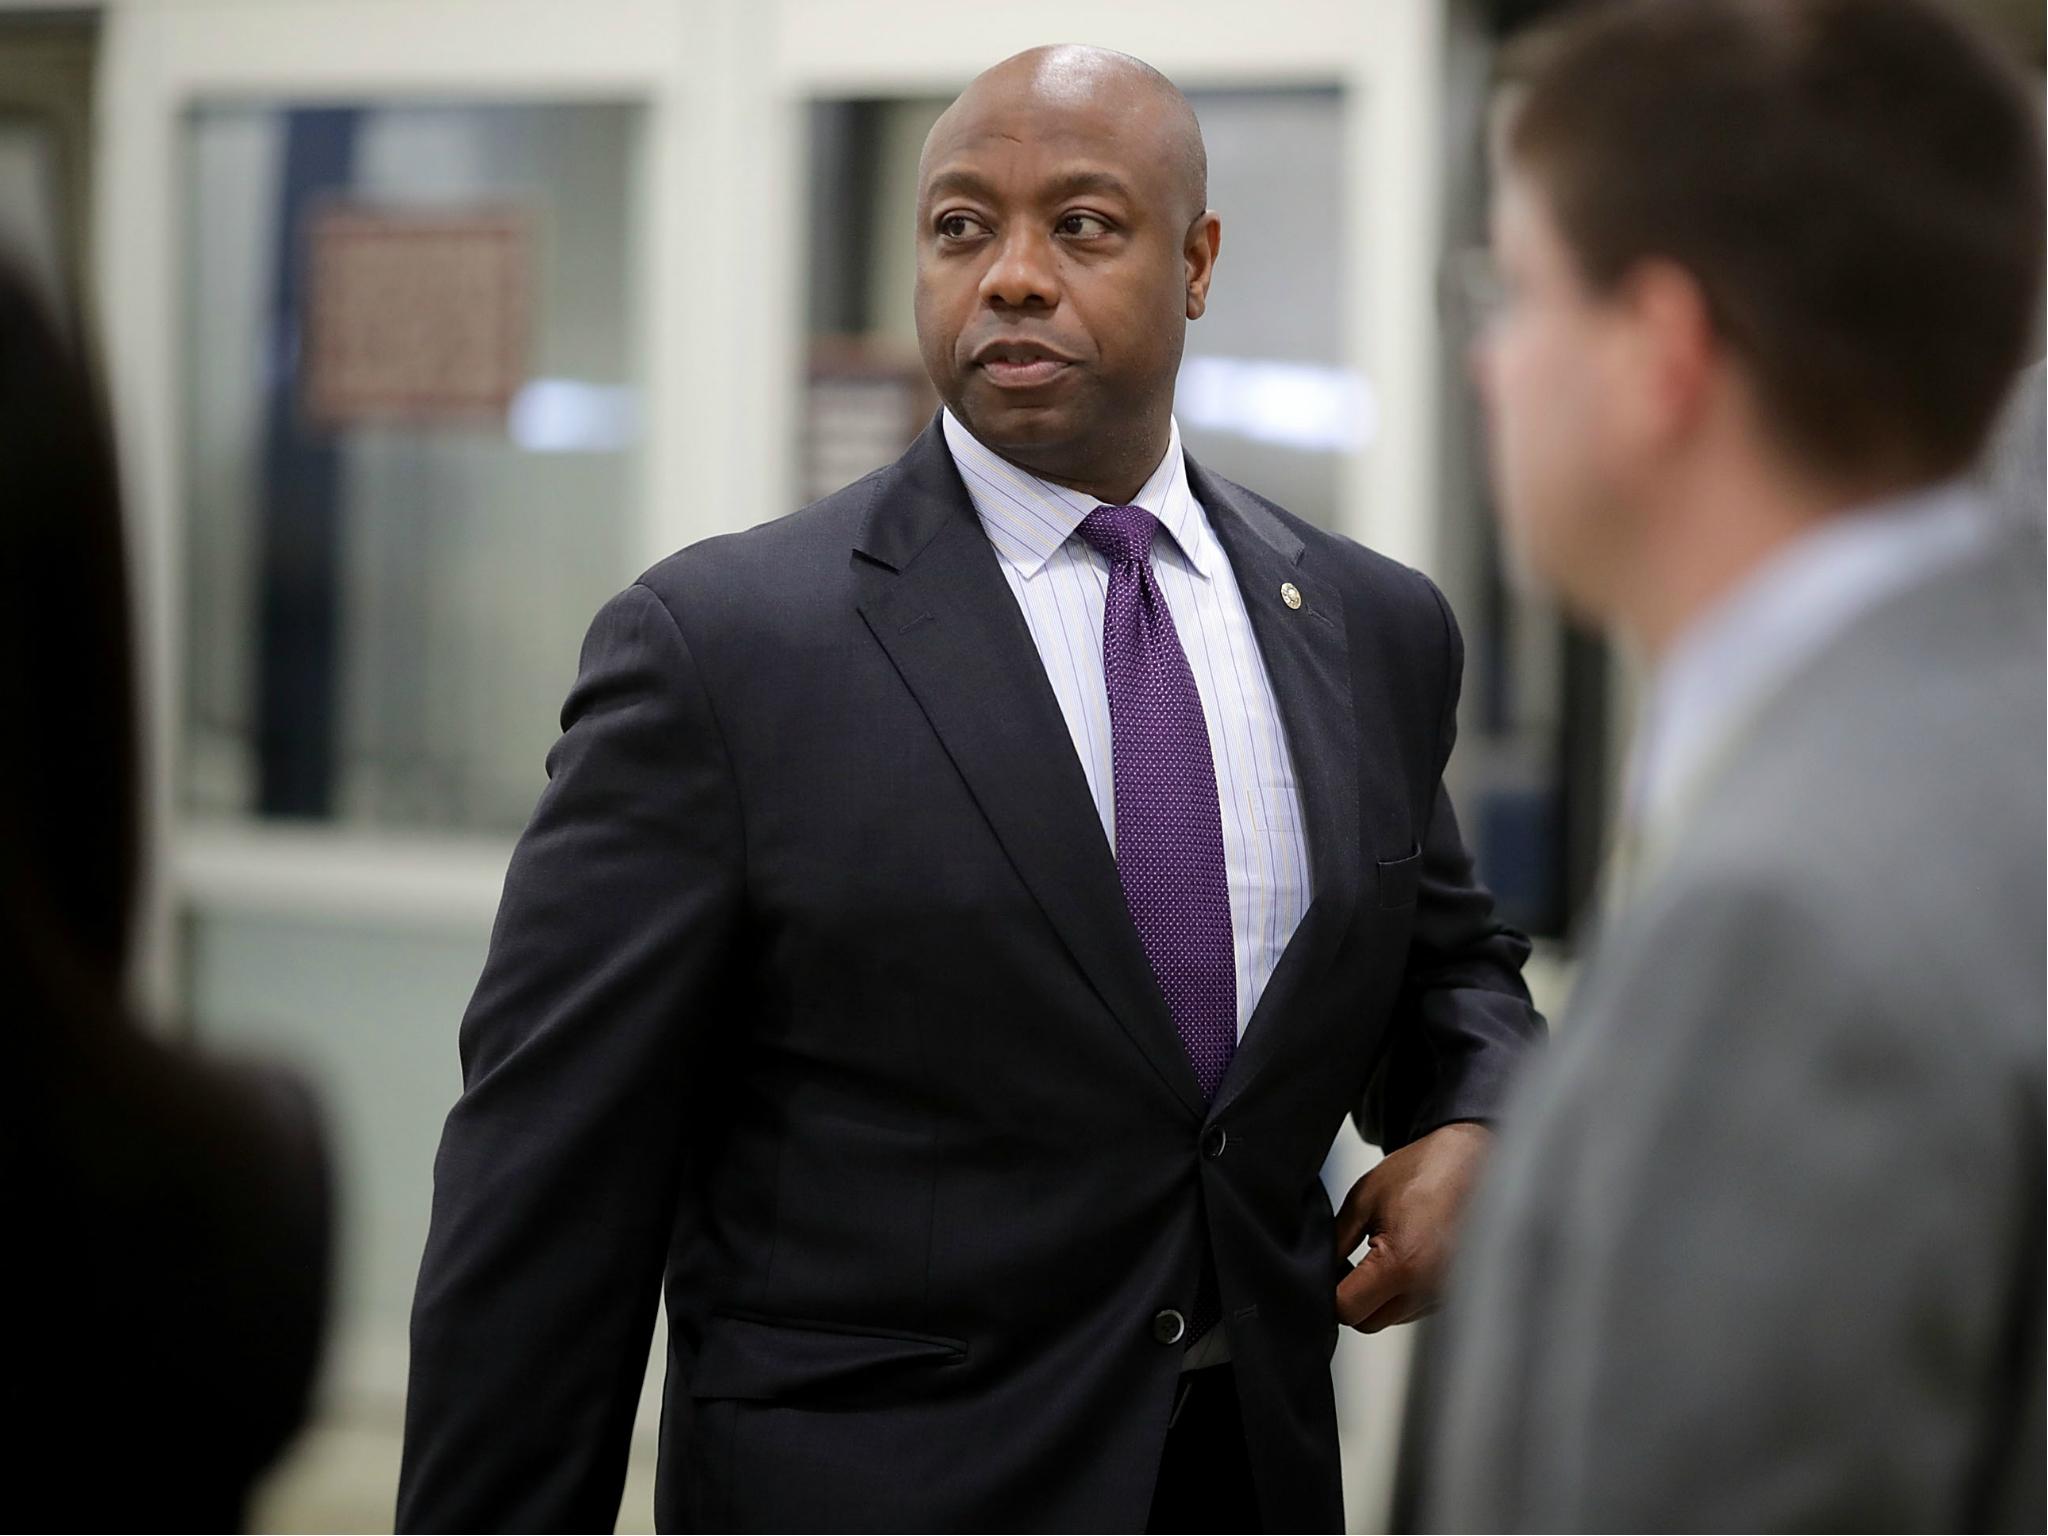 Republican Senator Tim Scott met with Donald Trump about the President's controversial response to the violence in Charlottesville, Virginia and diversifying the White House staff.